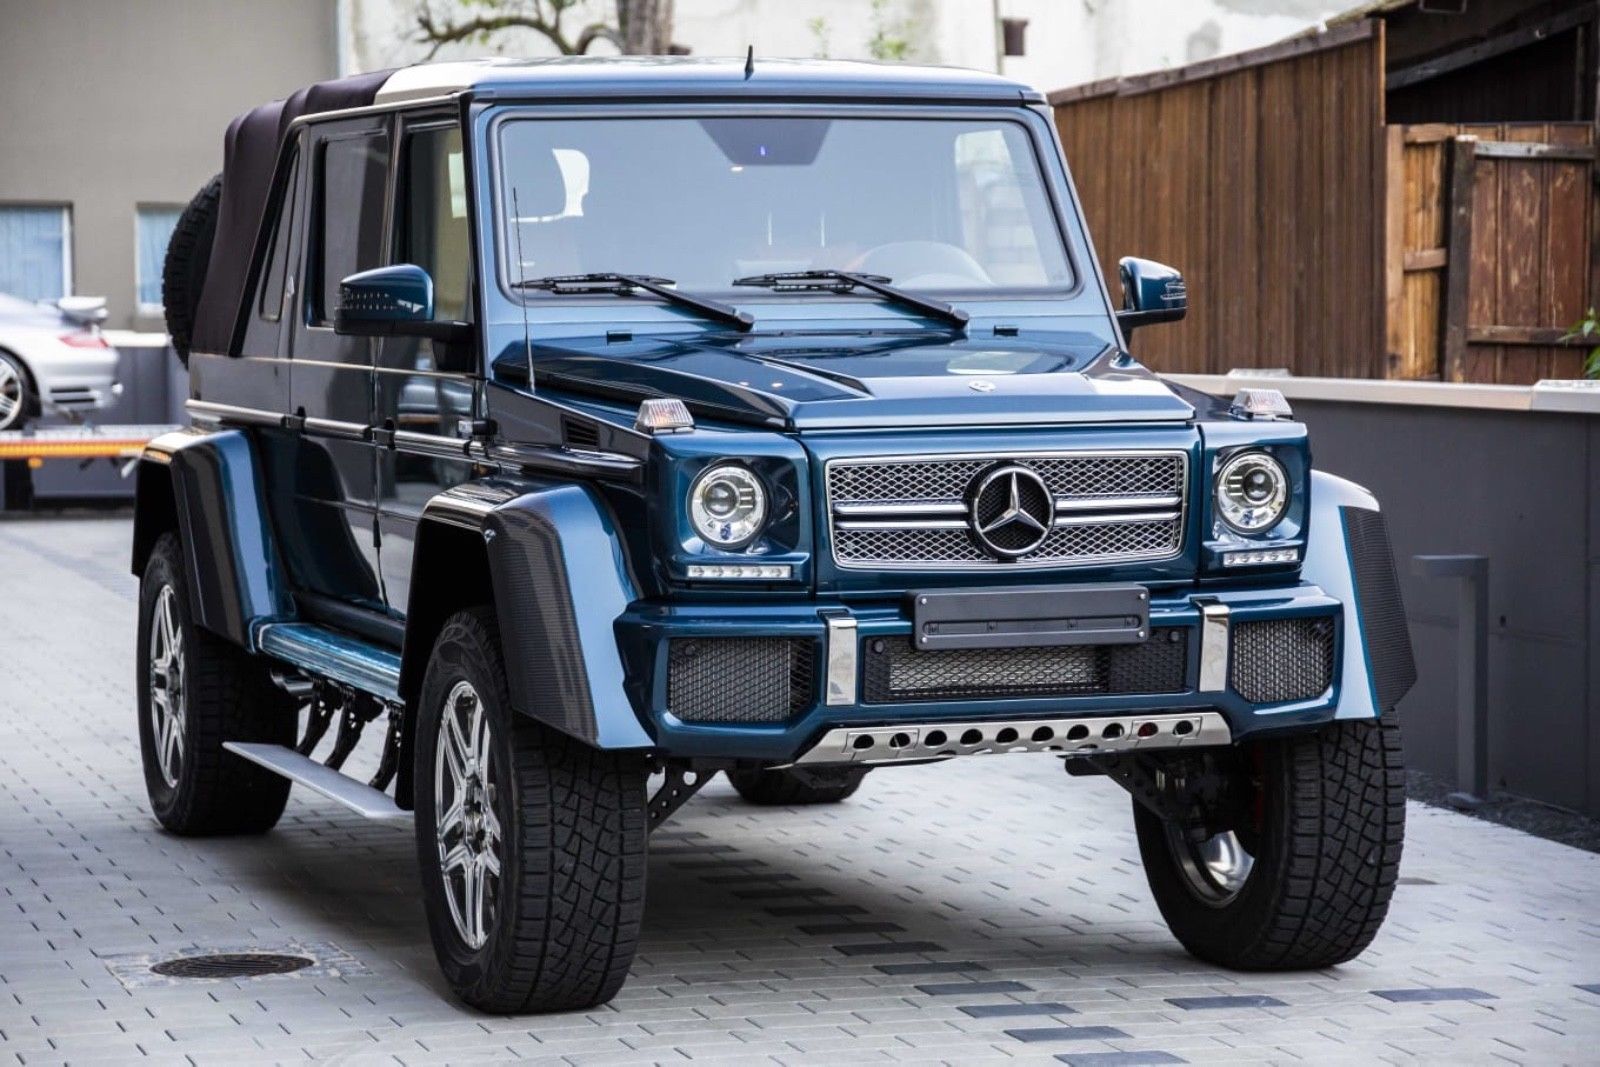 MERCEDES BRABUS G700 B63 S 6X6 - Luxury Pulse Cars - Germany - For sale ...